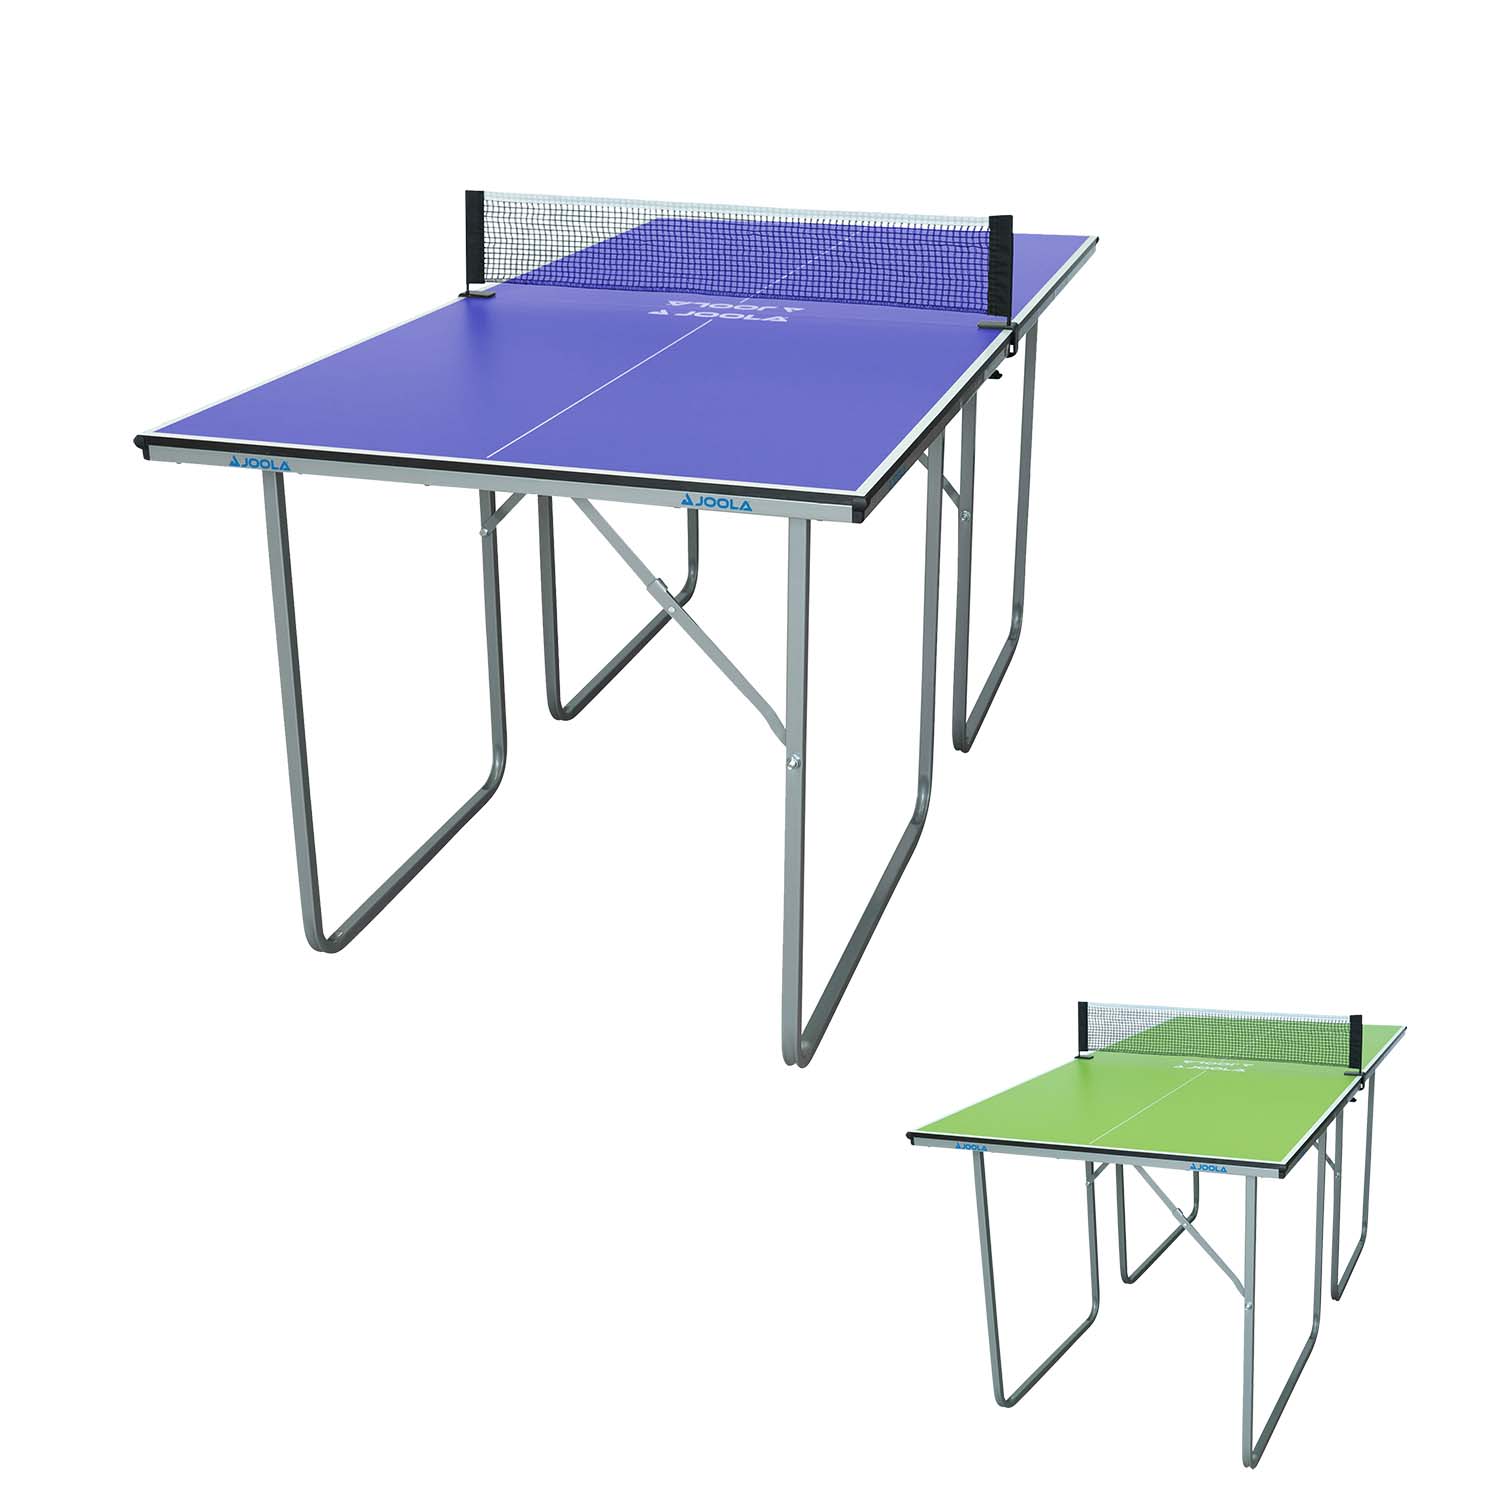 Blue and green JOOLA Midsize Compact Sport Ping Pong Table